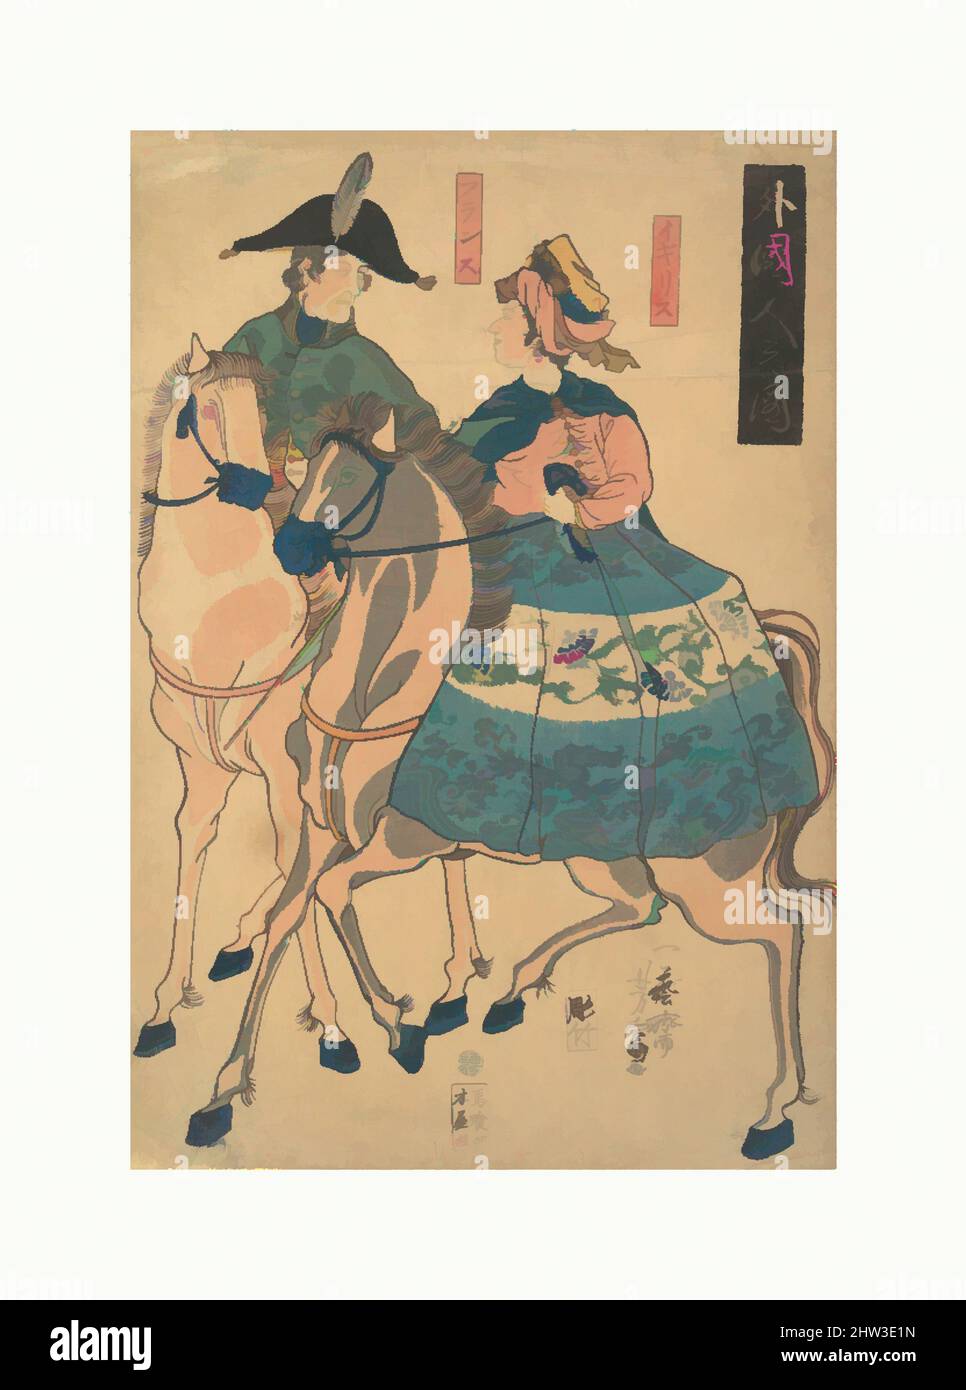 Art inspired by 外国人之図, Views of Foreigners (Gaikokujin no zu), Edo period (1615–1868), 1861, Japan, Polychrome woodblock print; ink and color on paper, H. 14 1/2 in. (36.8 cm); W. 10 in. (25.4 cm), Prints, Utagawa Yoshitomi (Japanese, active mid-19th century, Classic works modernized by Artotop with a splash of modernity. Shapes, color and value, eye-catching visual impact on art. Emotions through freedom of artworks in a contemporary way. A timeless message pursuing a wildly creative new direction. Artists turning to the digital medium and creating the Artotop NFT Stock Photo